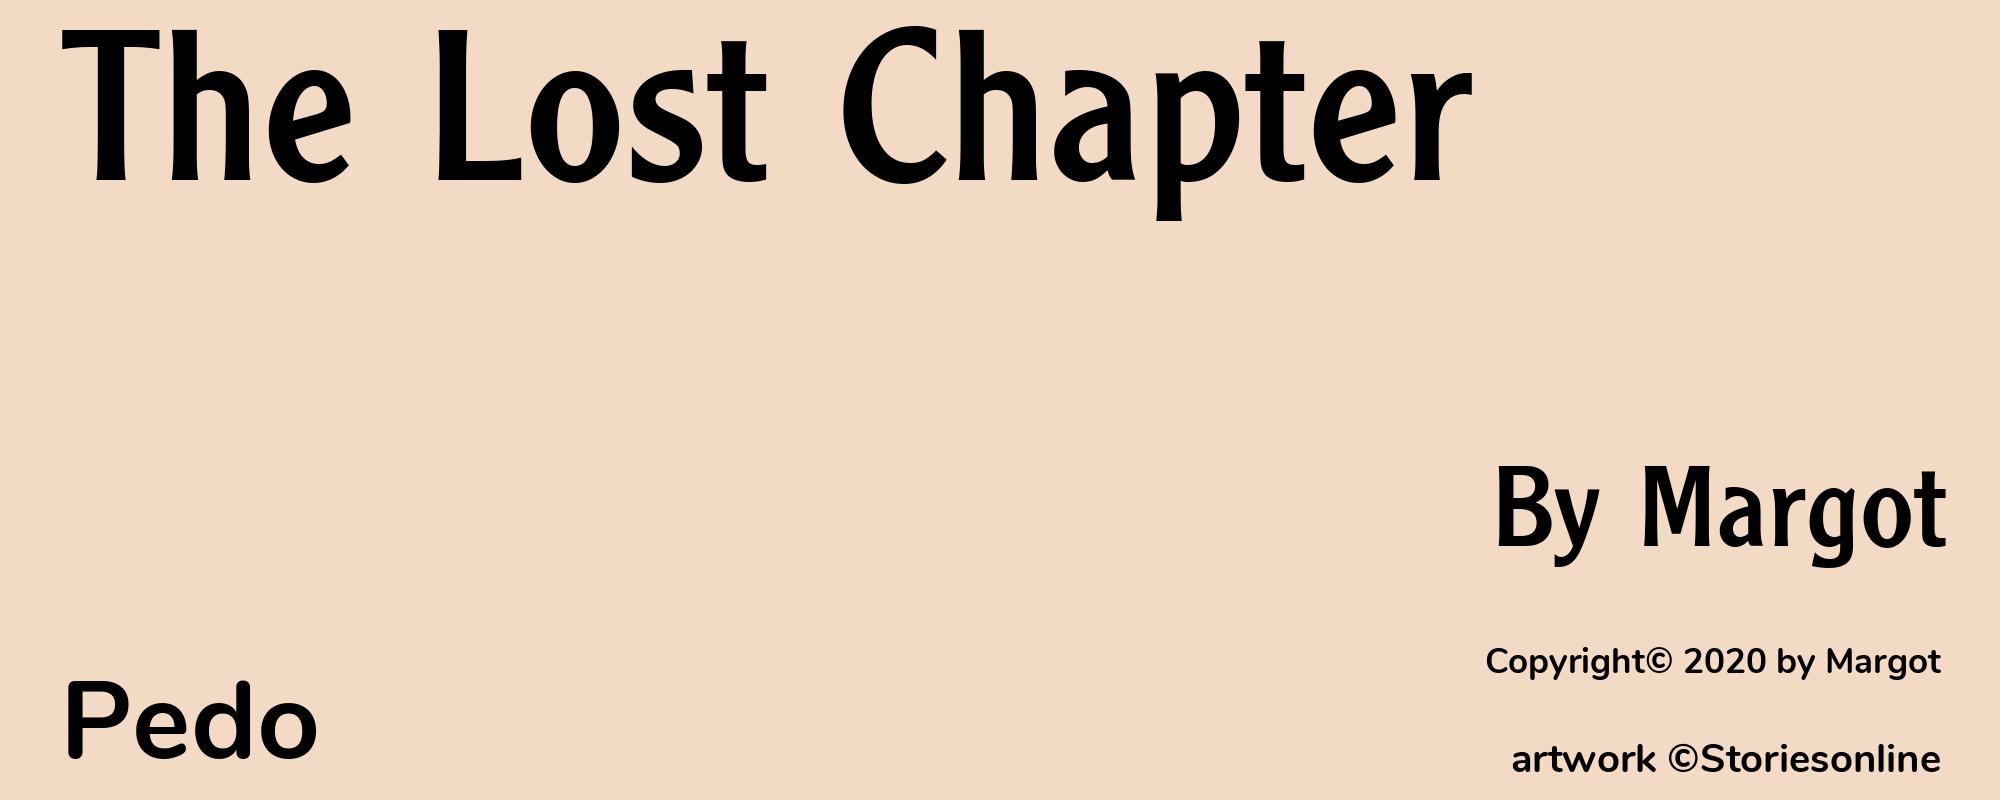 The Lost Chapter - Cover